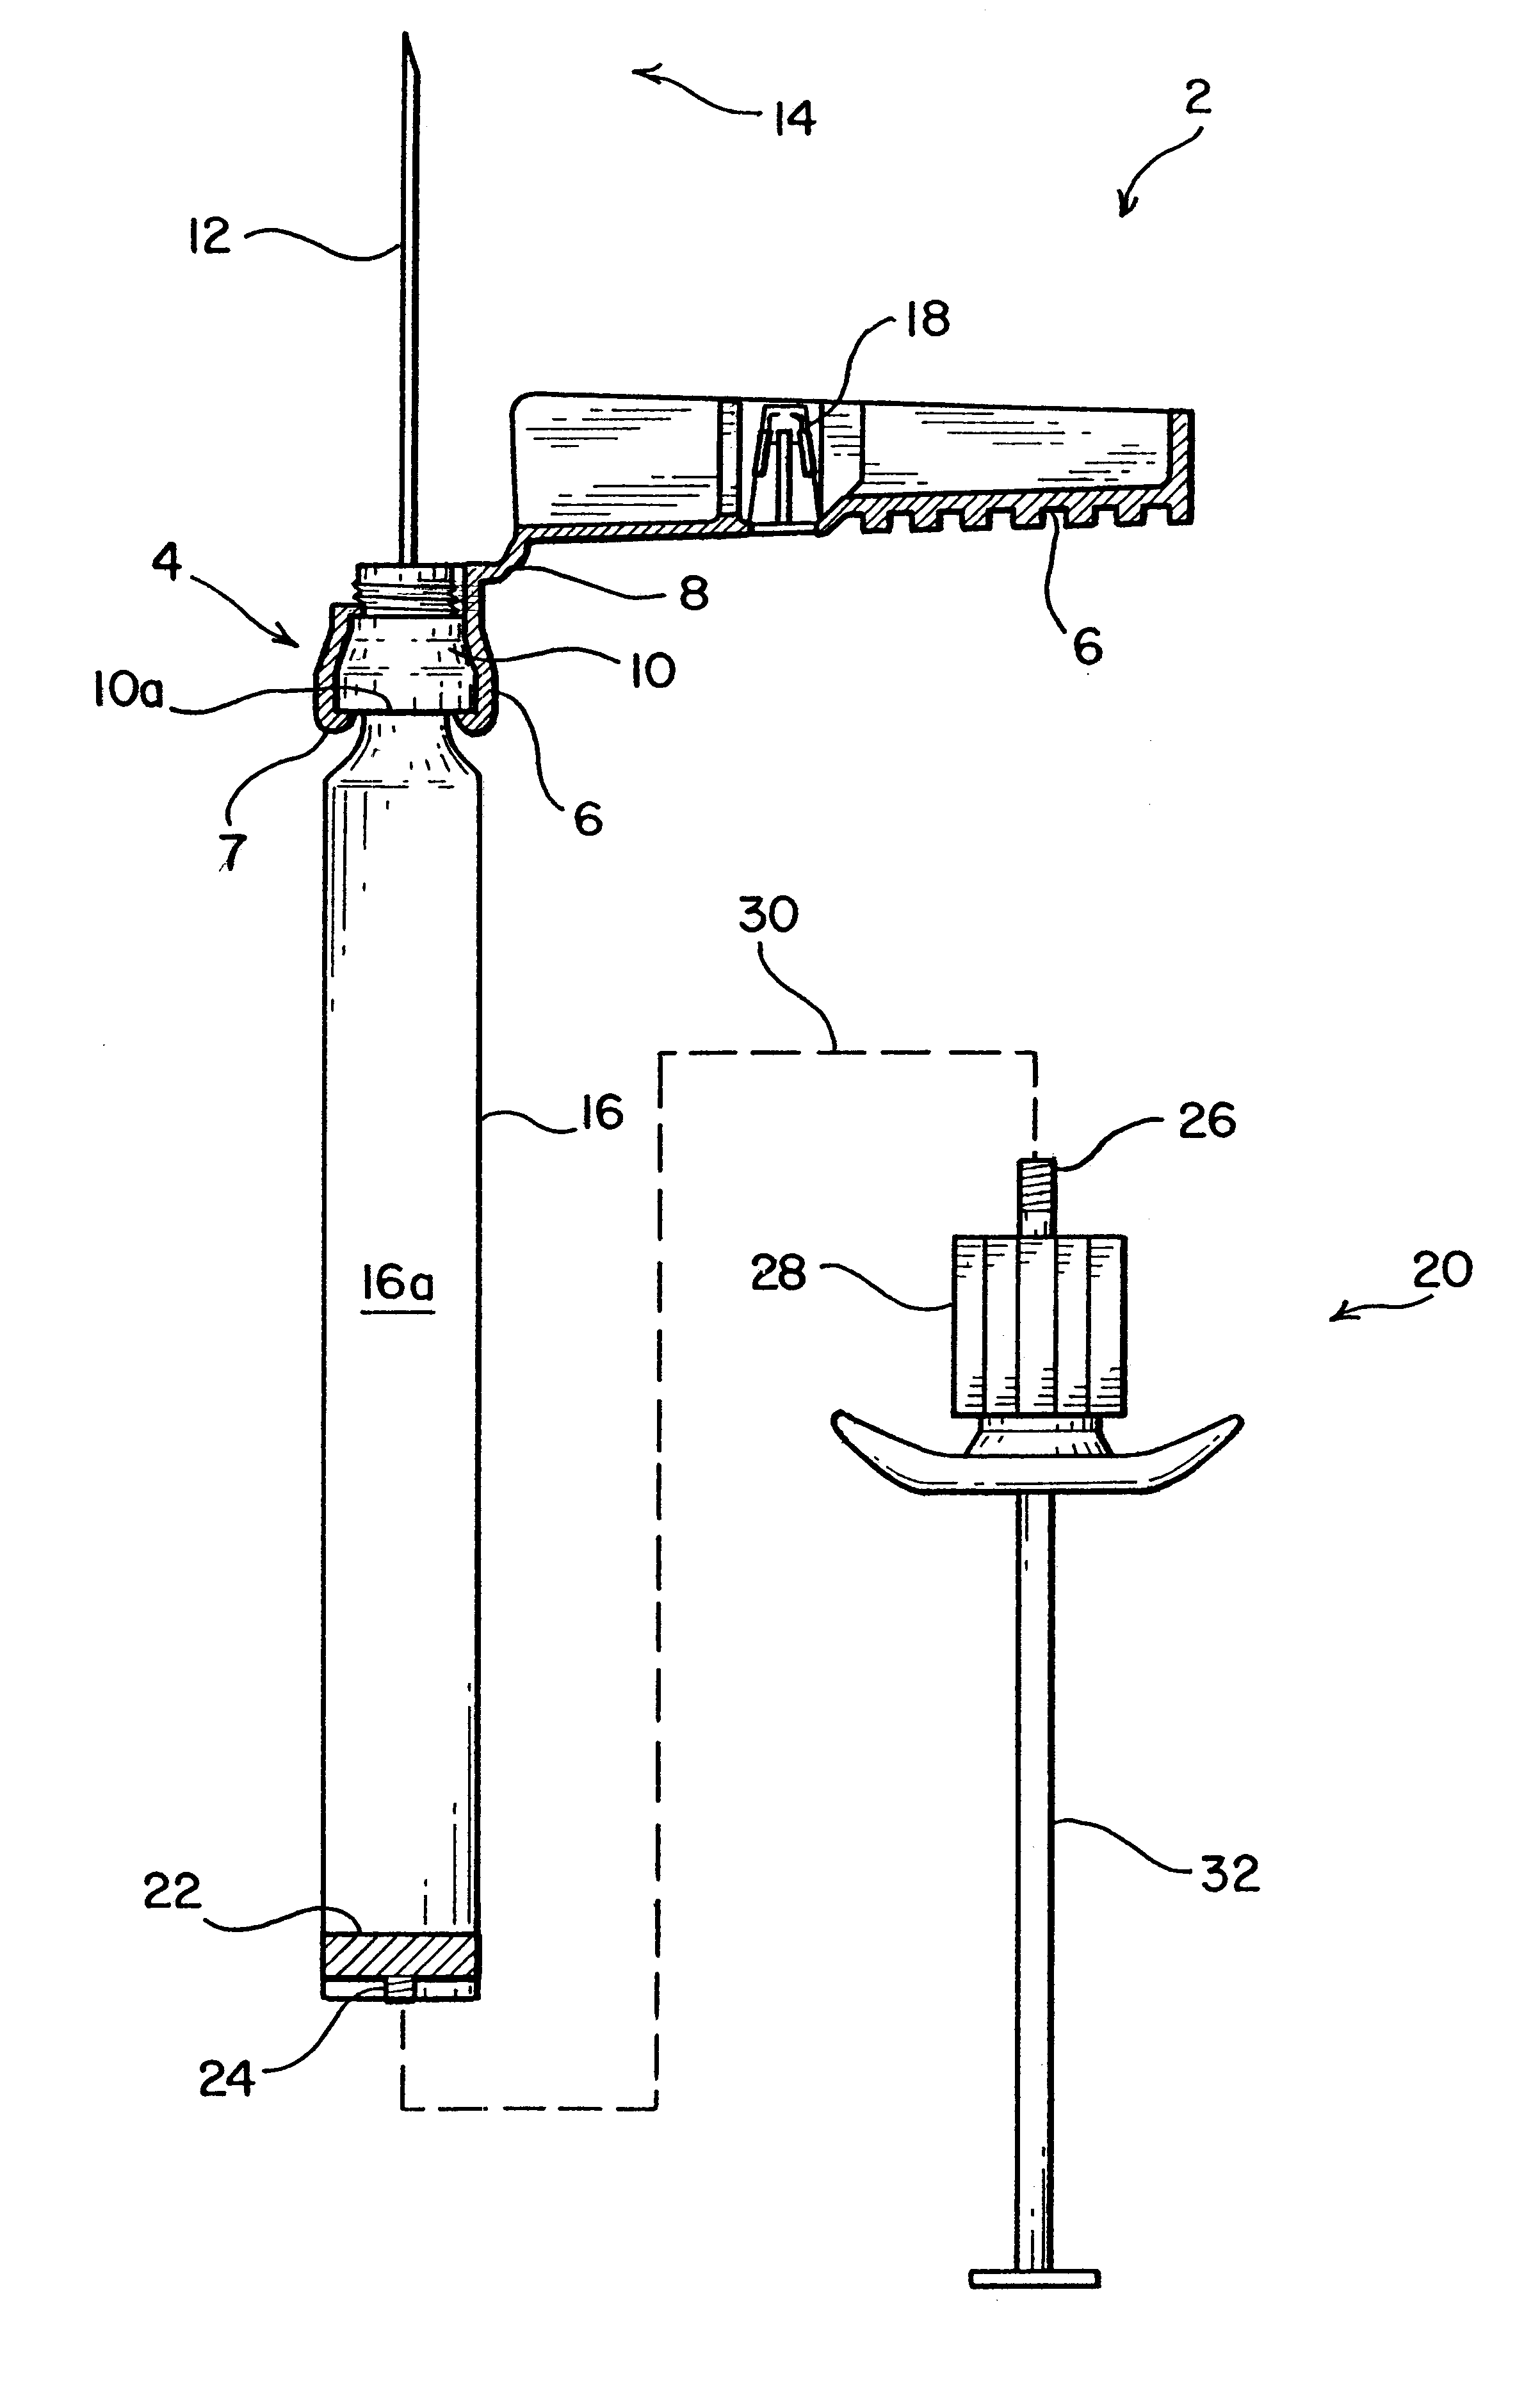 Needle protection apparatus used with a vial